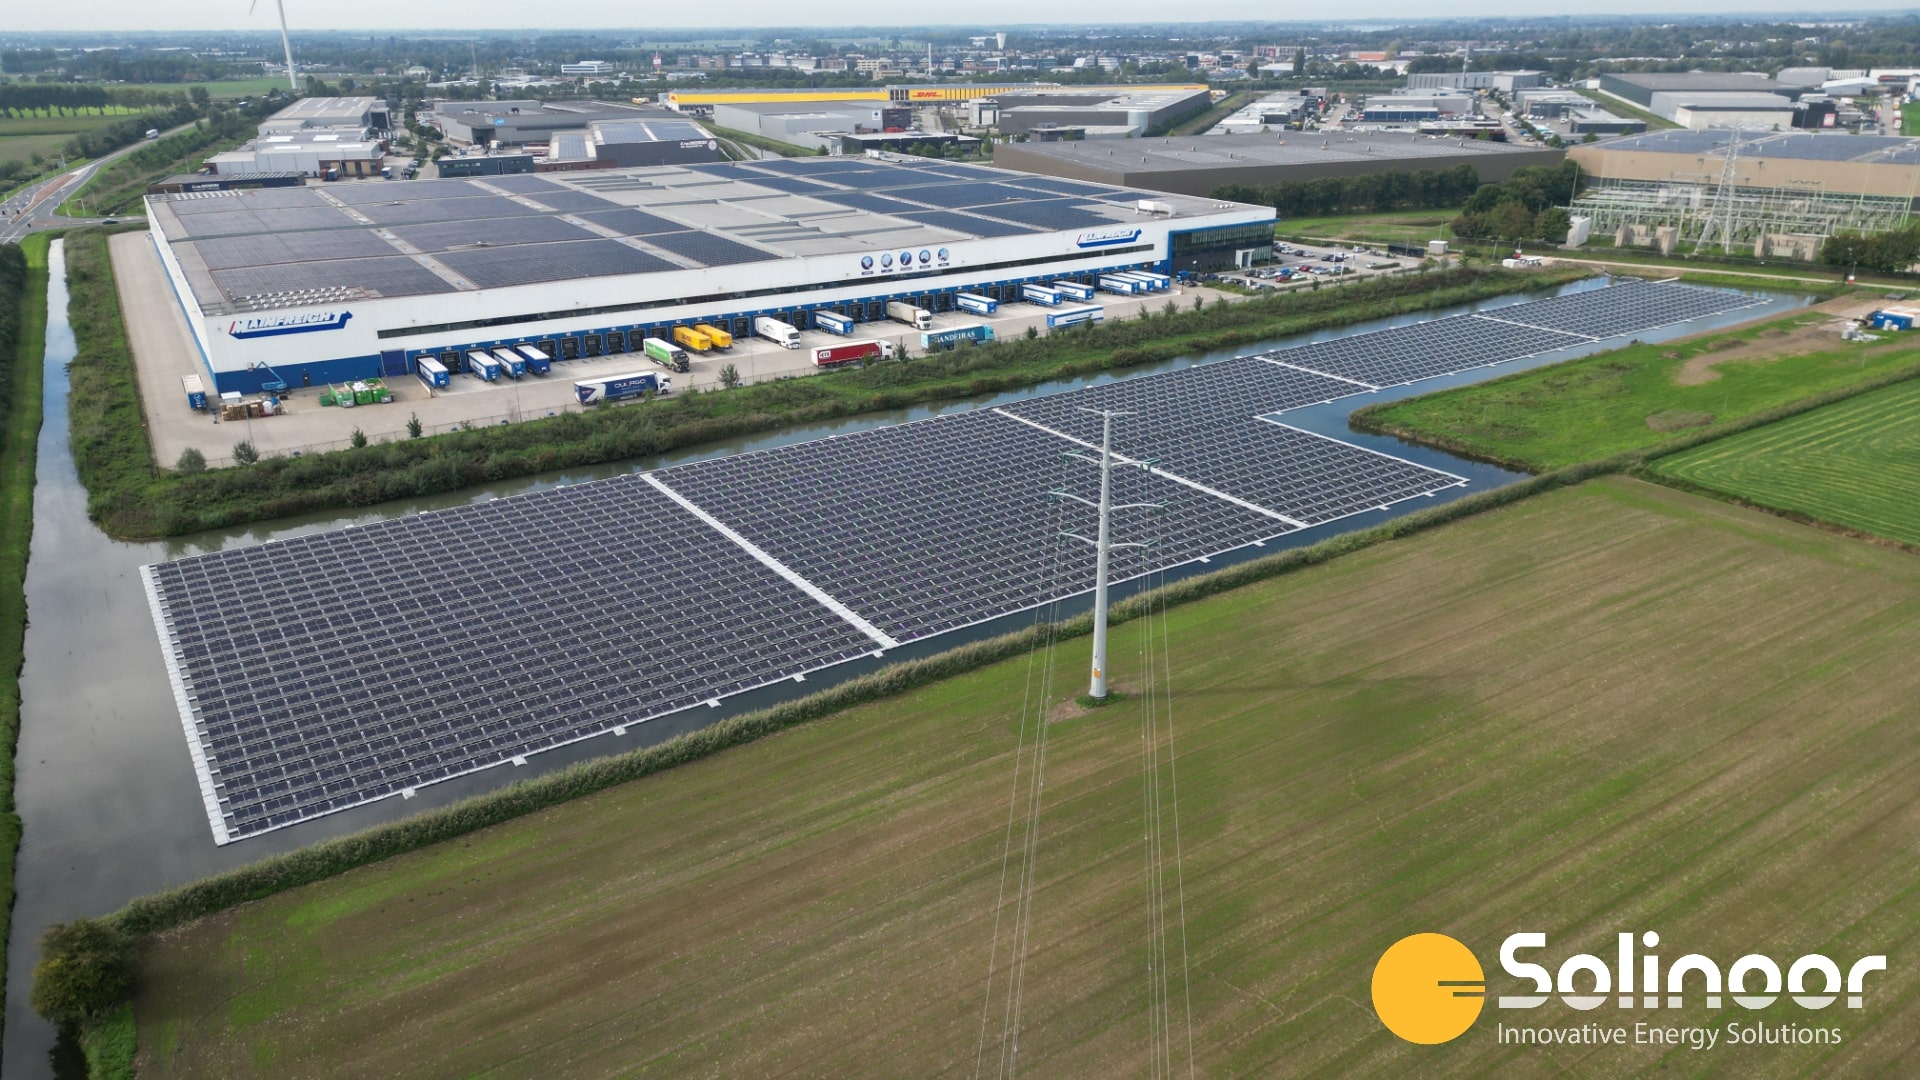 Floating solar park zaltbommel complete industry and business park operational